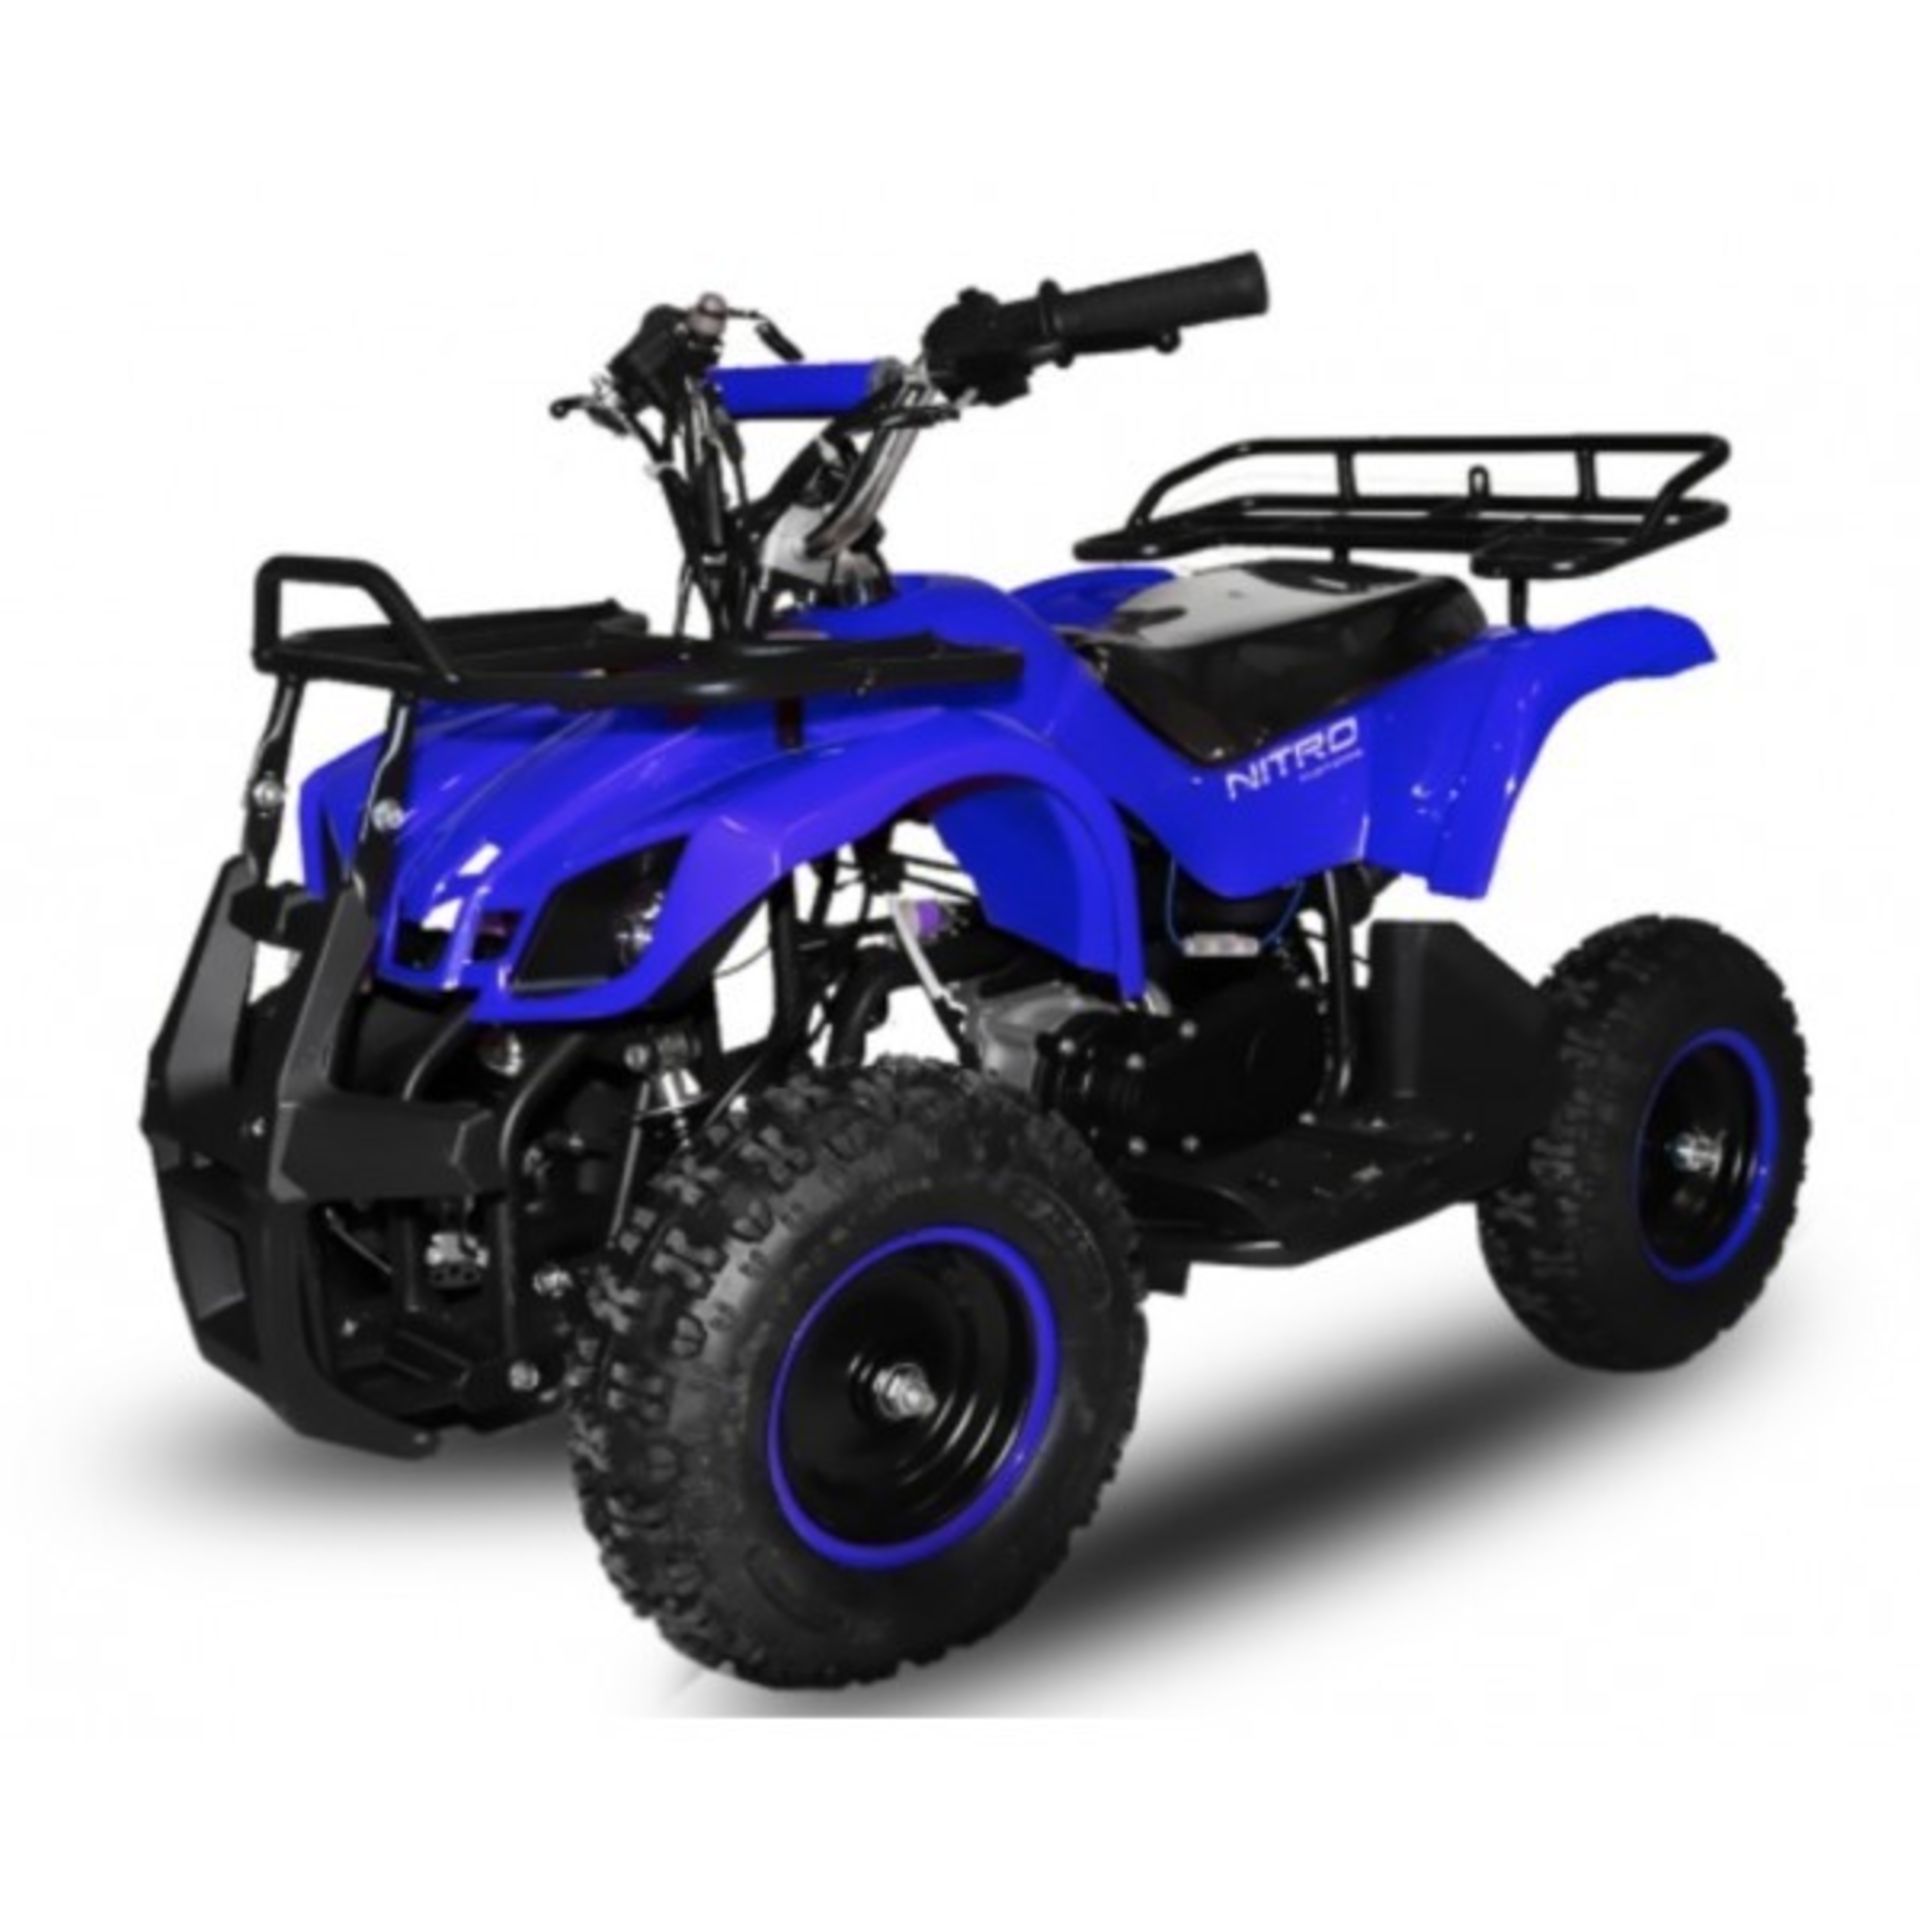 V Brand New 50cc Mini Quad Bike FRM - Colours May Vary - Picture May Vary From Actual Item - Image 2 of 3